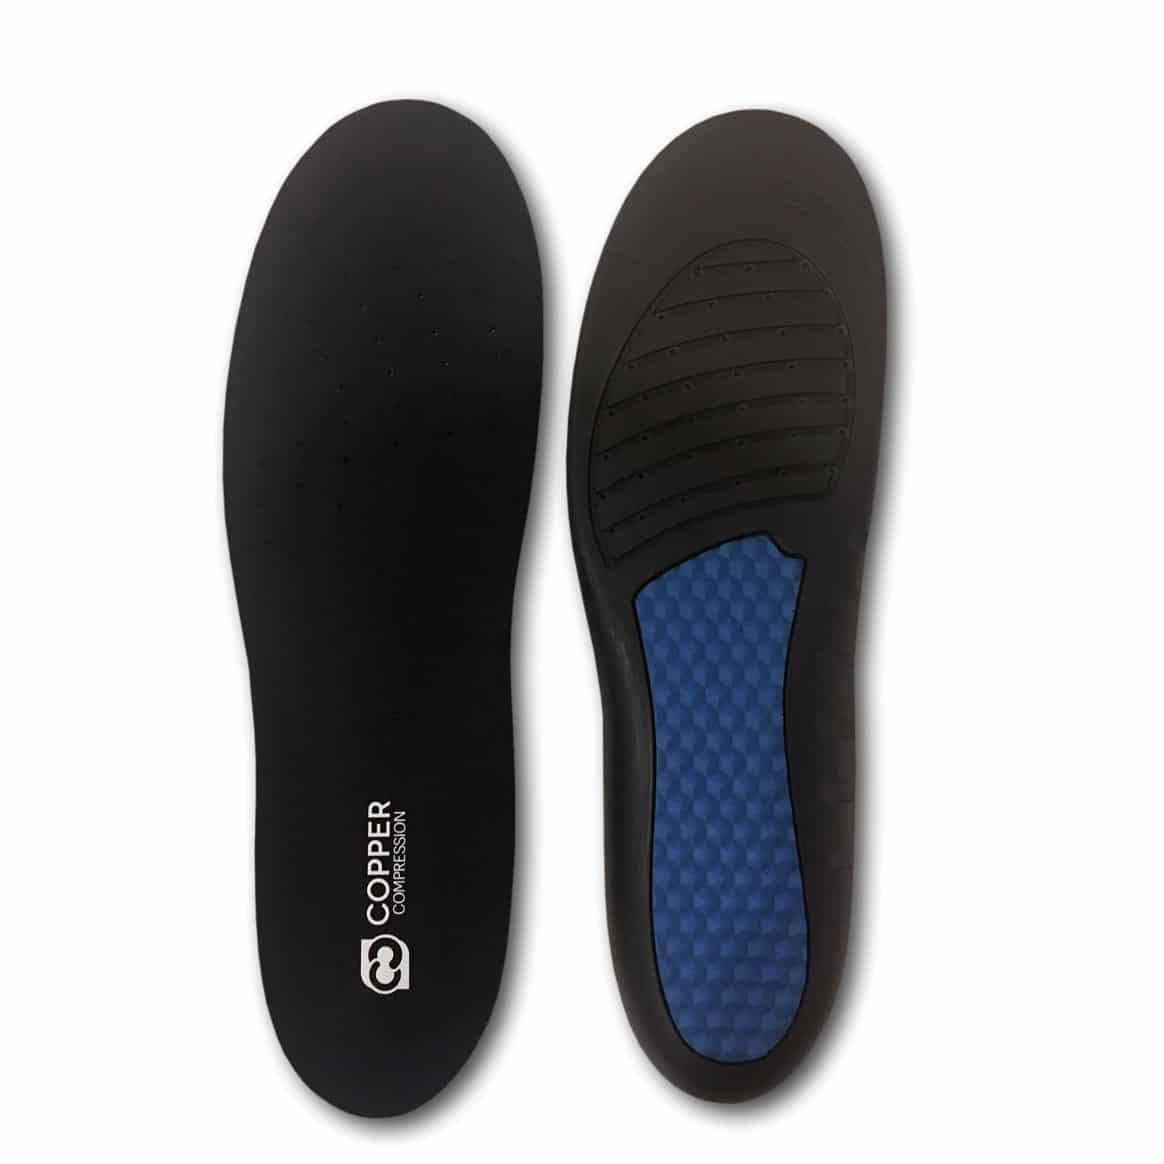 Top 10 Best shoe inserts in 2021 Reviews | Guide's User